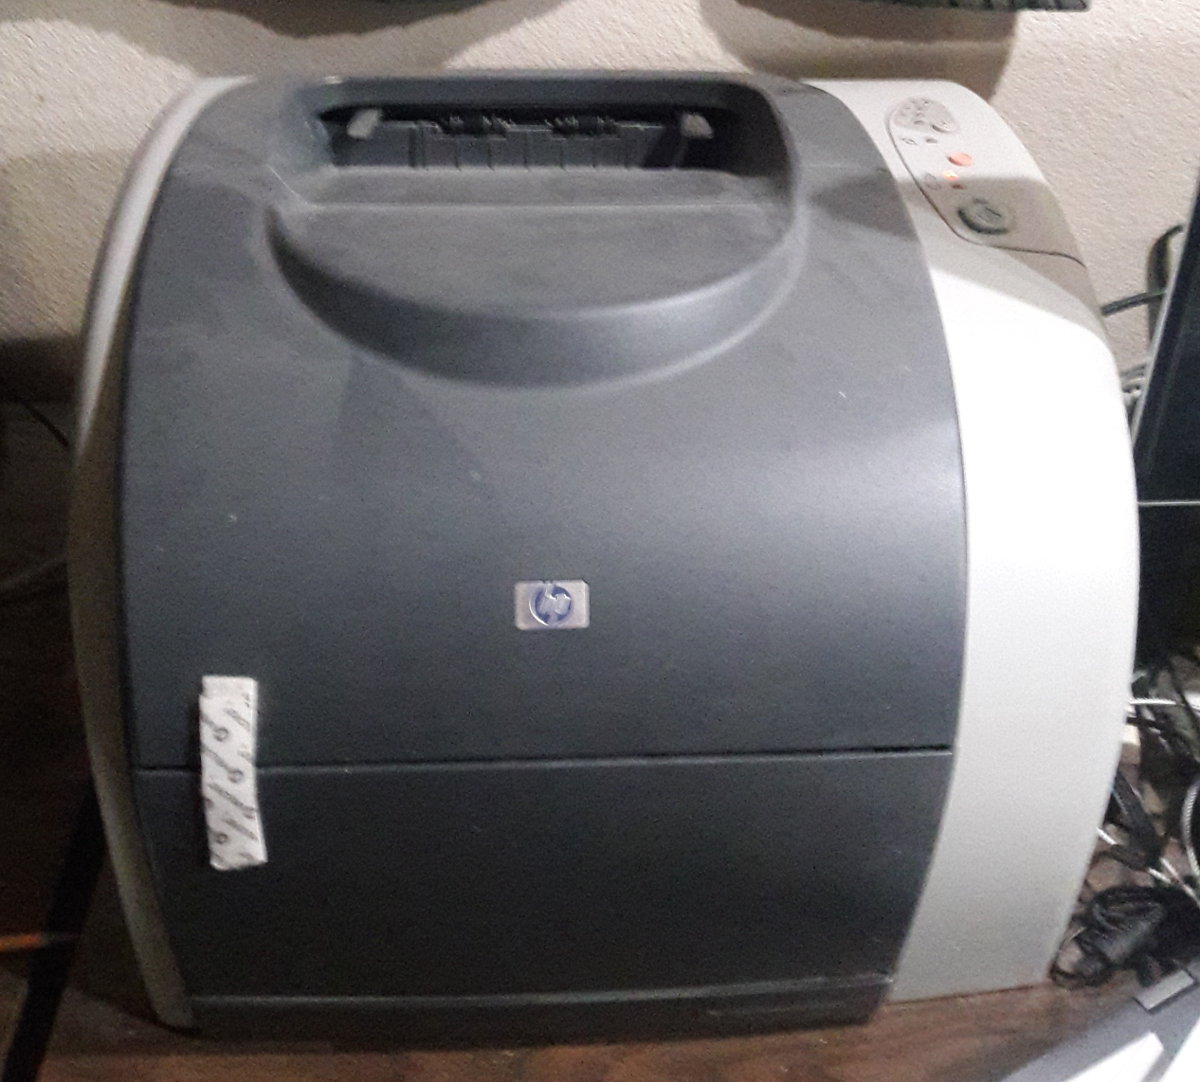 Here is a picture of my old LaserJet 2550L which I use as a black & white printer.